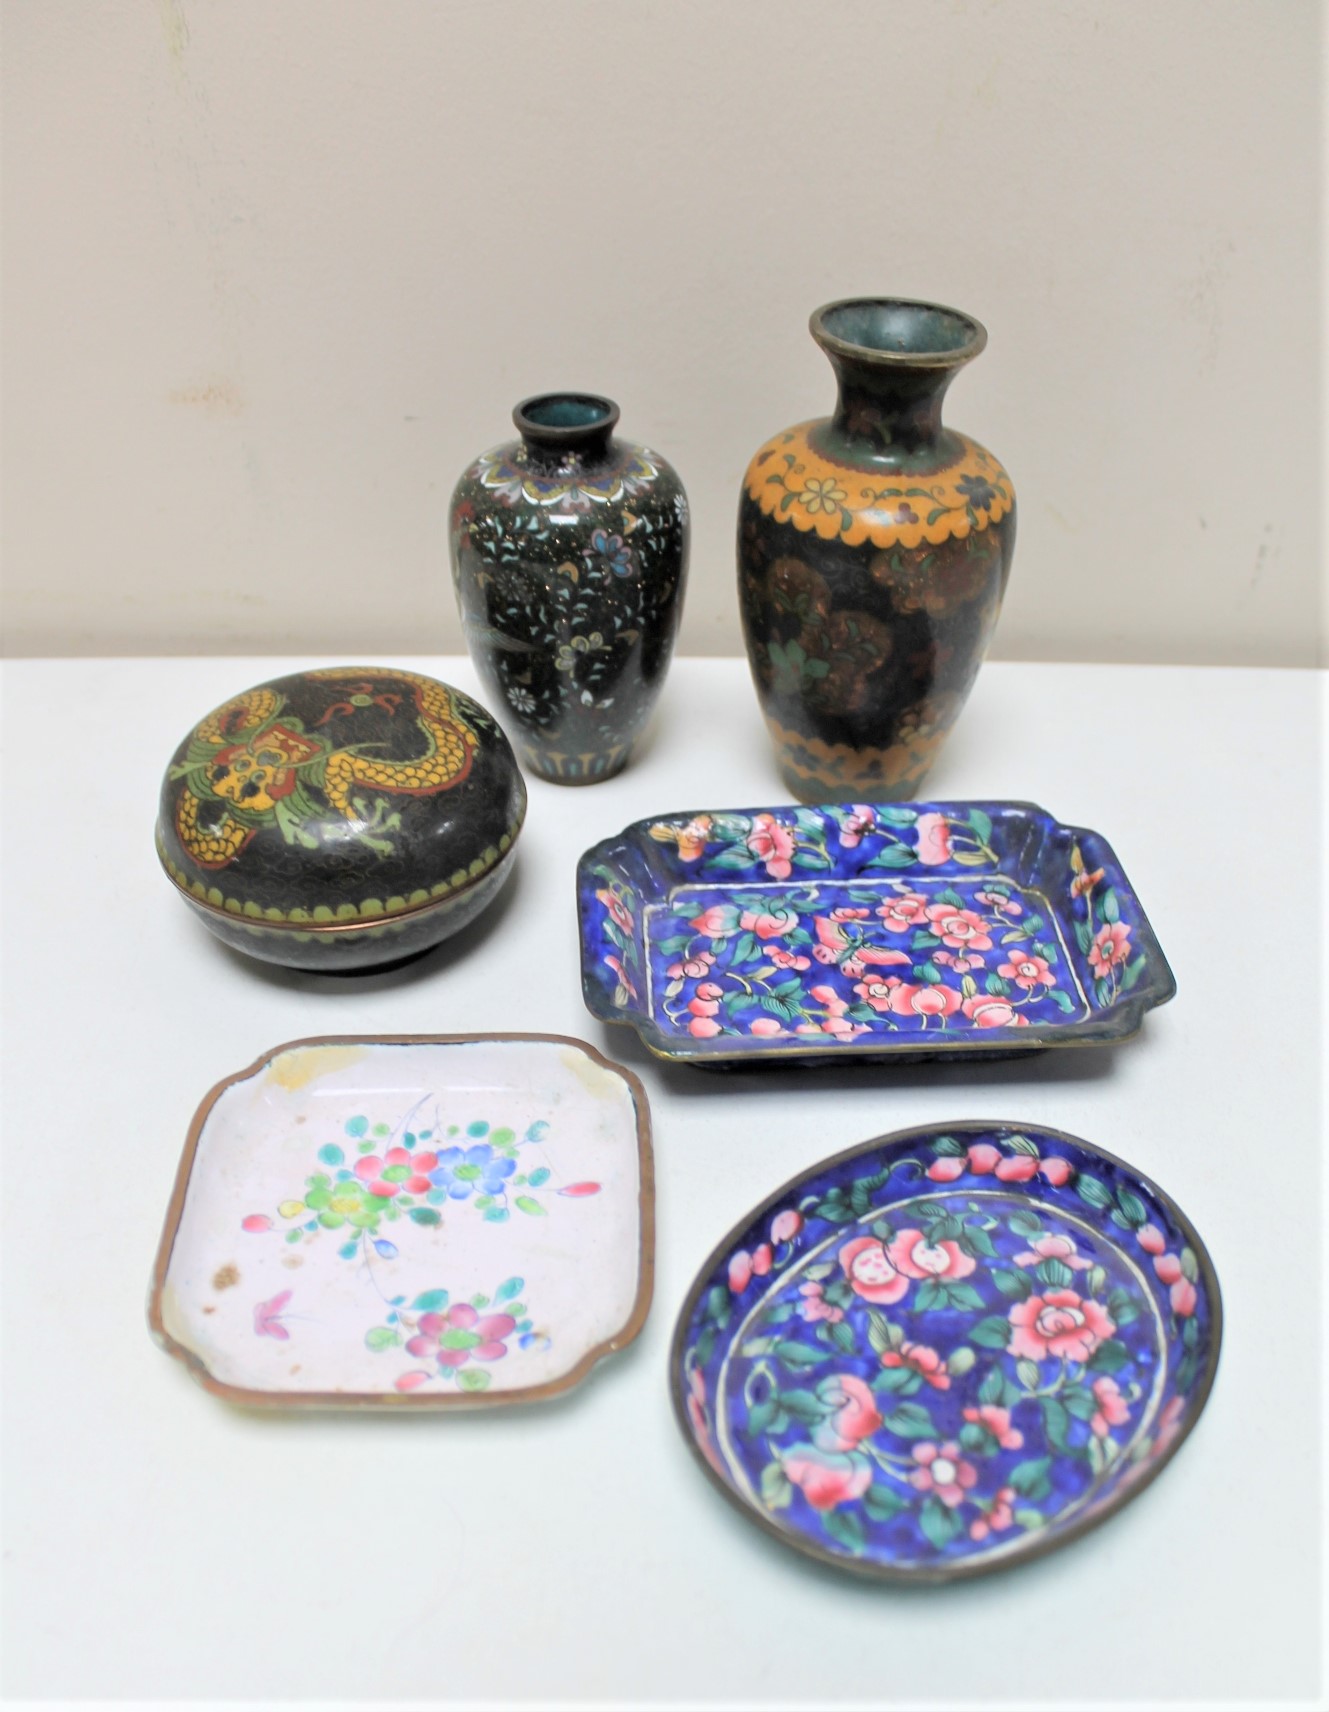 Two cloisonne vases together with a dragon designed trinket pot and three shallow dishes